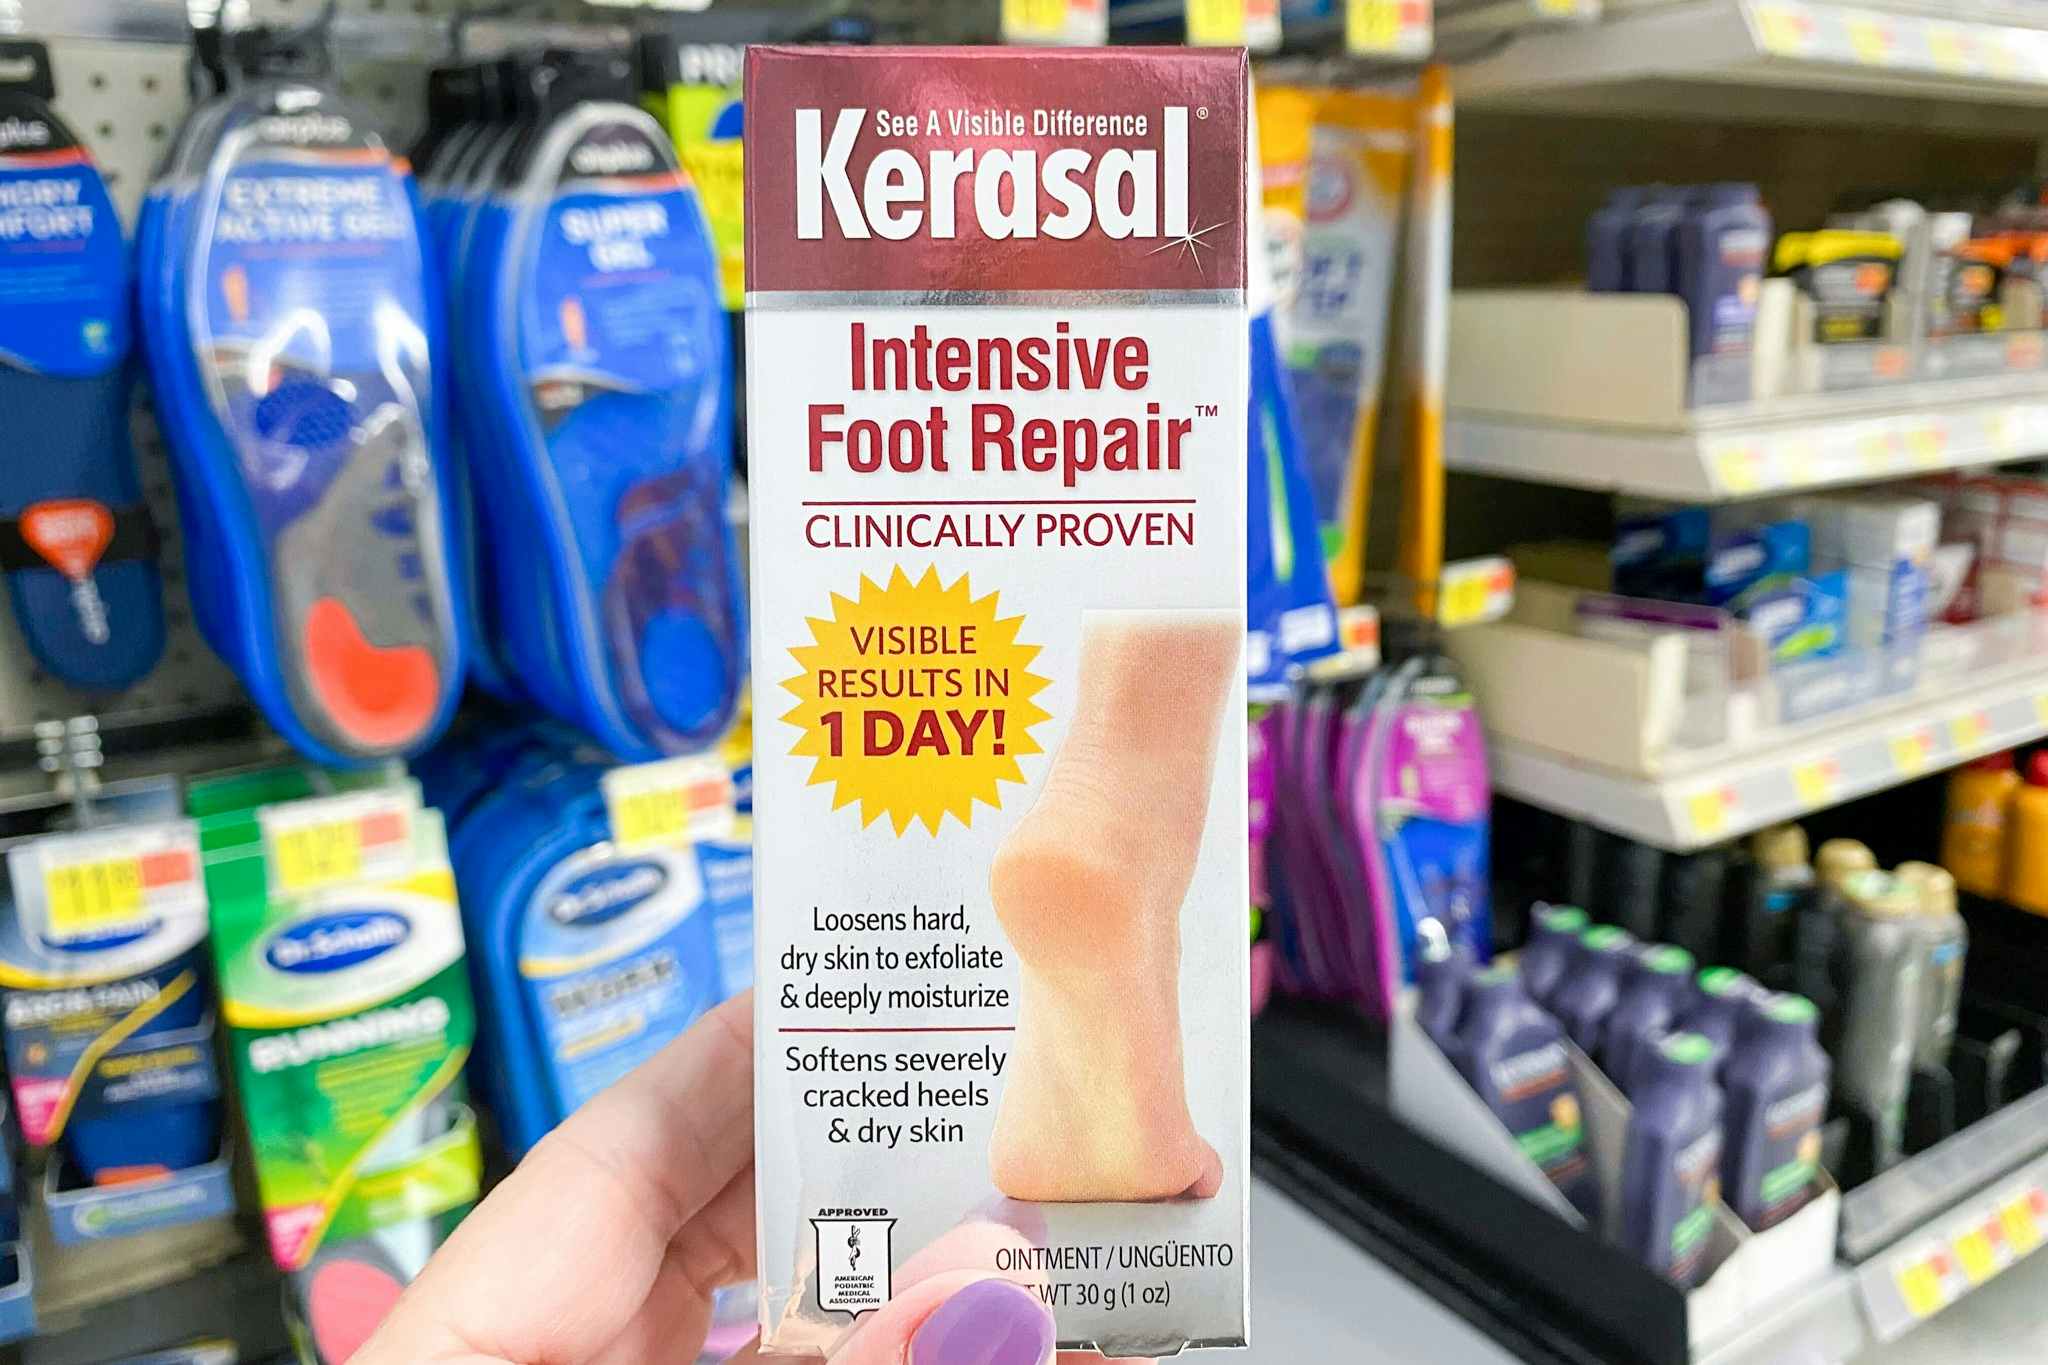 Kerasal Intensive Foot Repair Ointment, as Low as $5.74 on Amazon